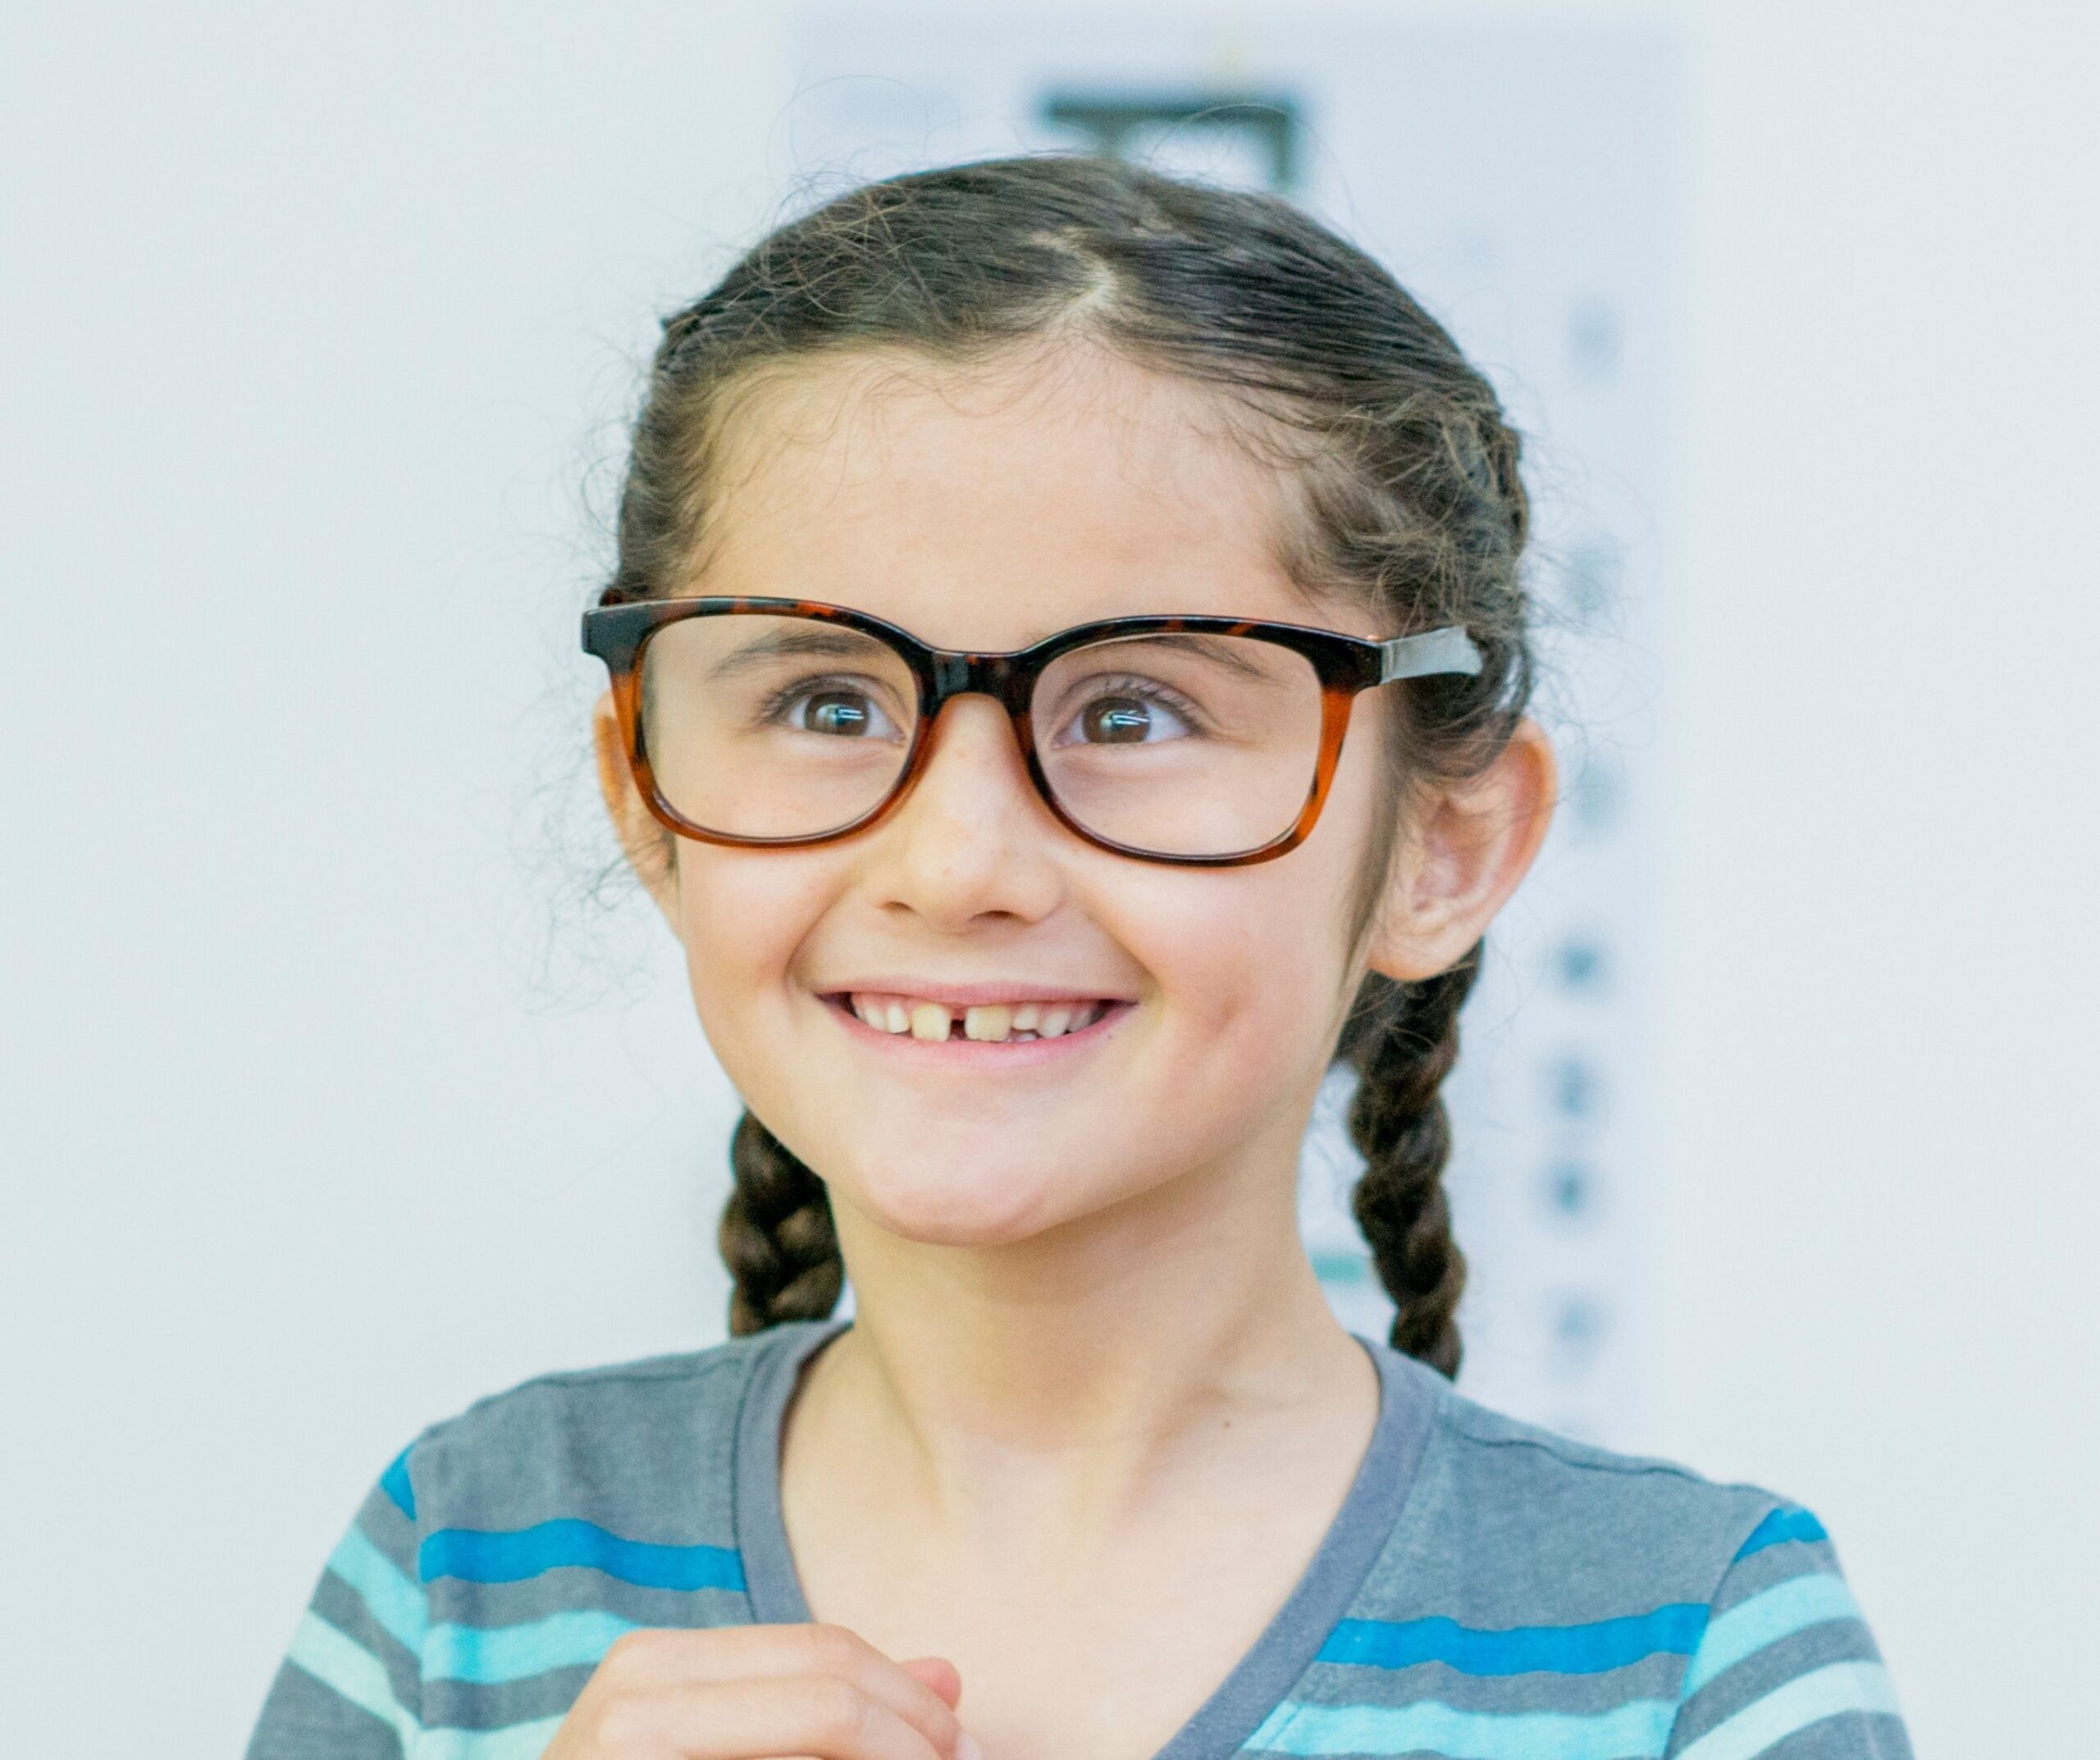 girl ooking excited aged about 10, wearing a pair of glasses, with braided and a blue top on